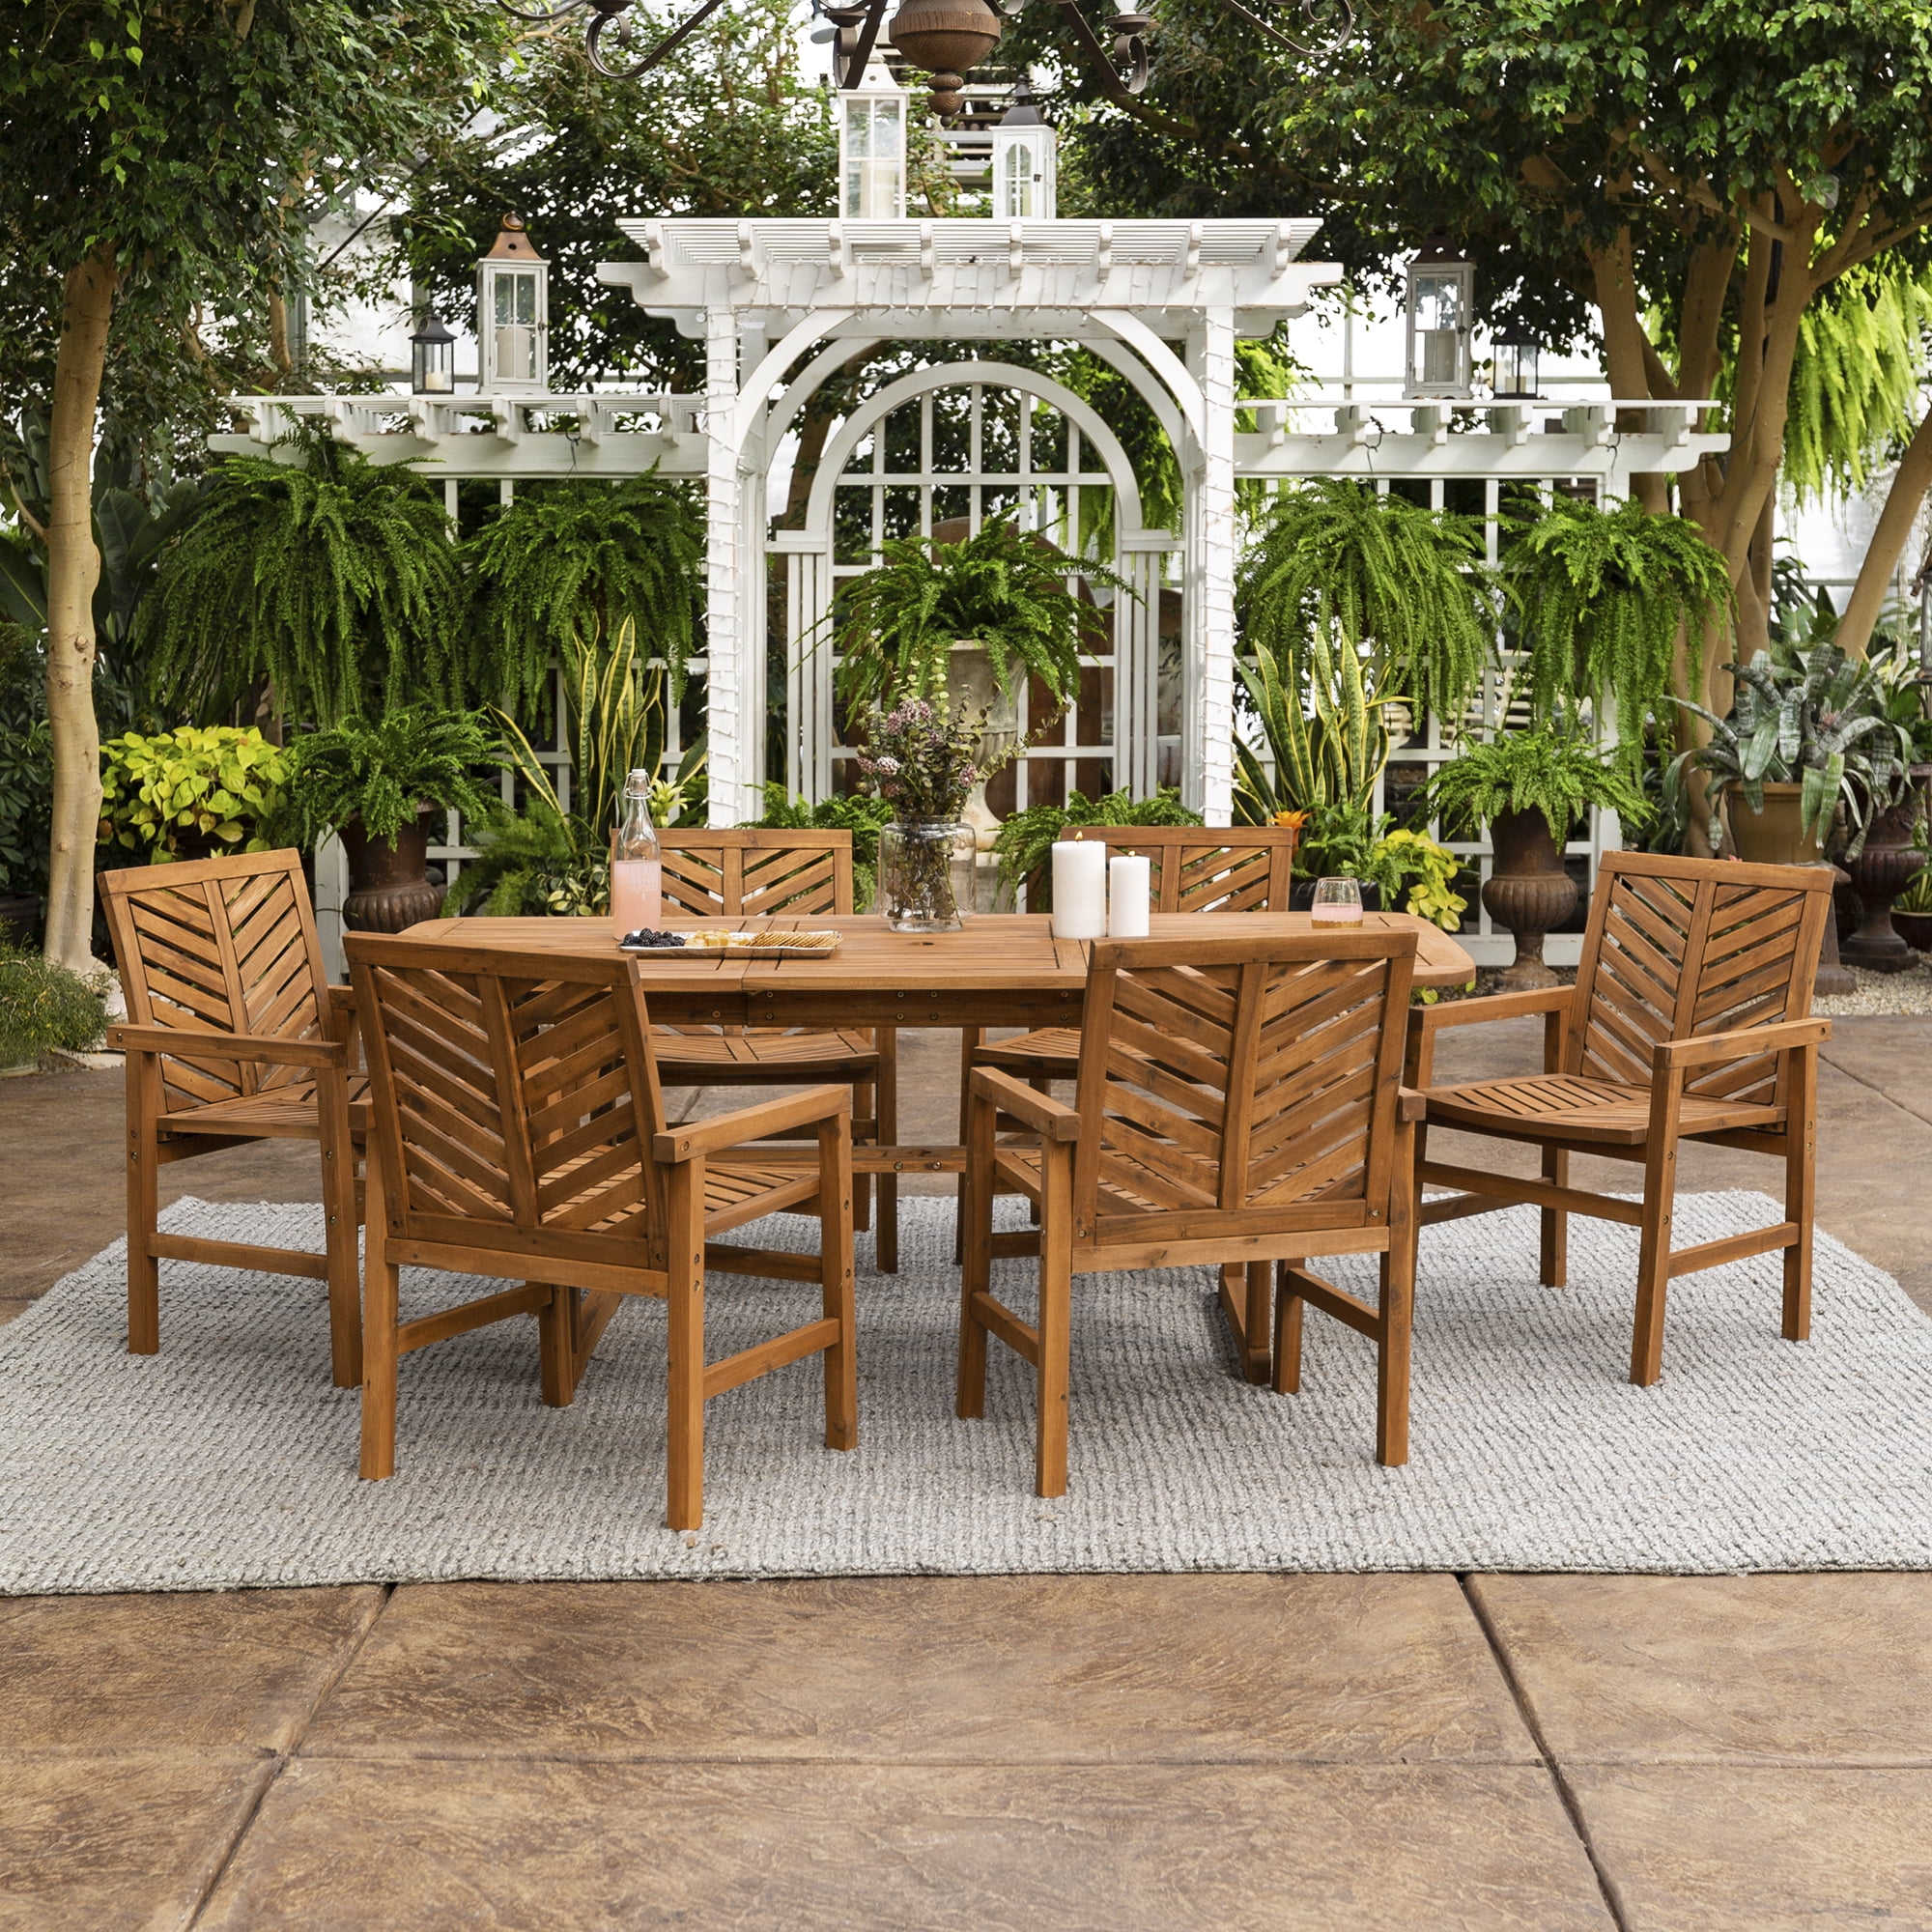 Manor Park Outdoor Patio Dining Set, 7 Piece, Multiple Colors and